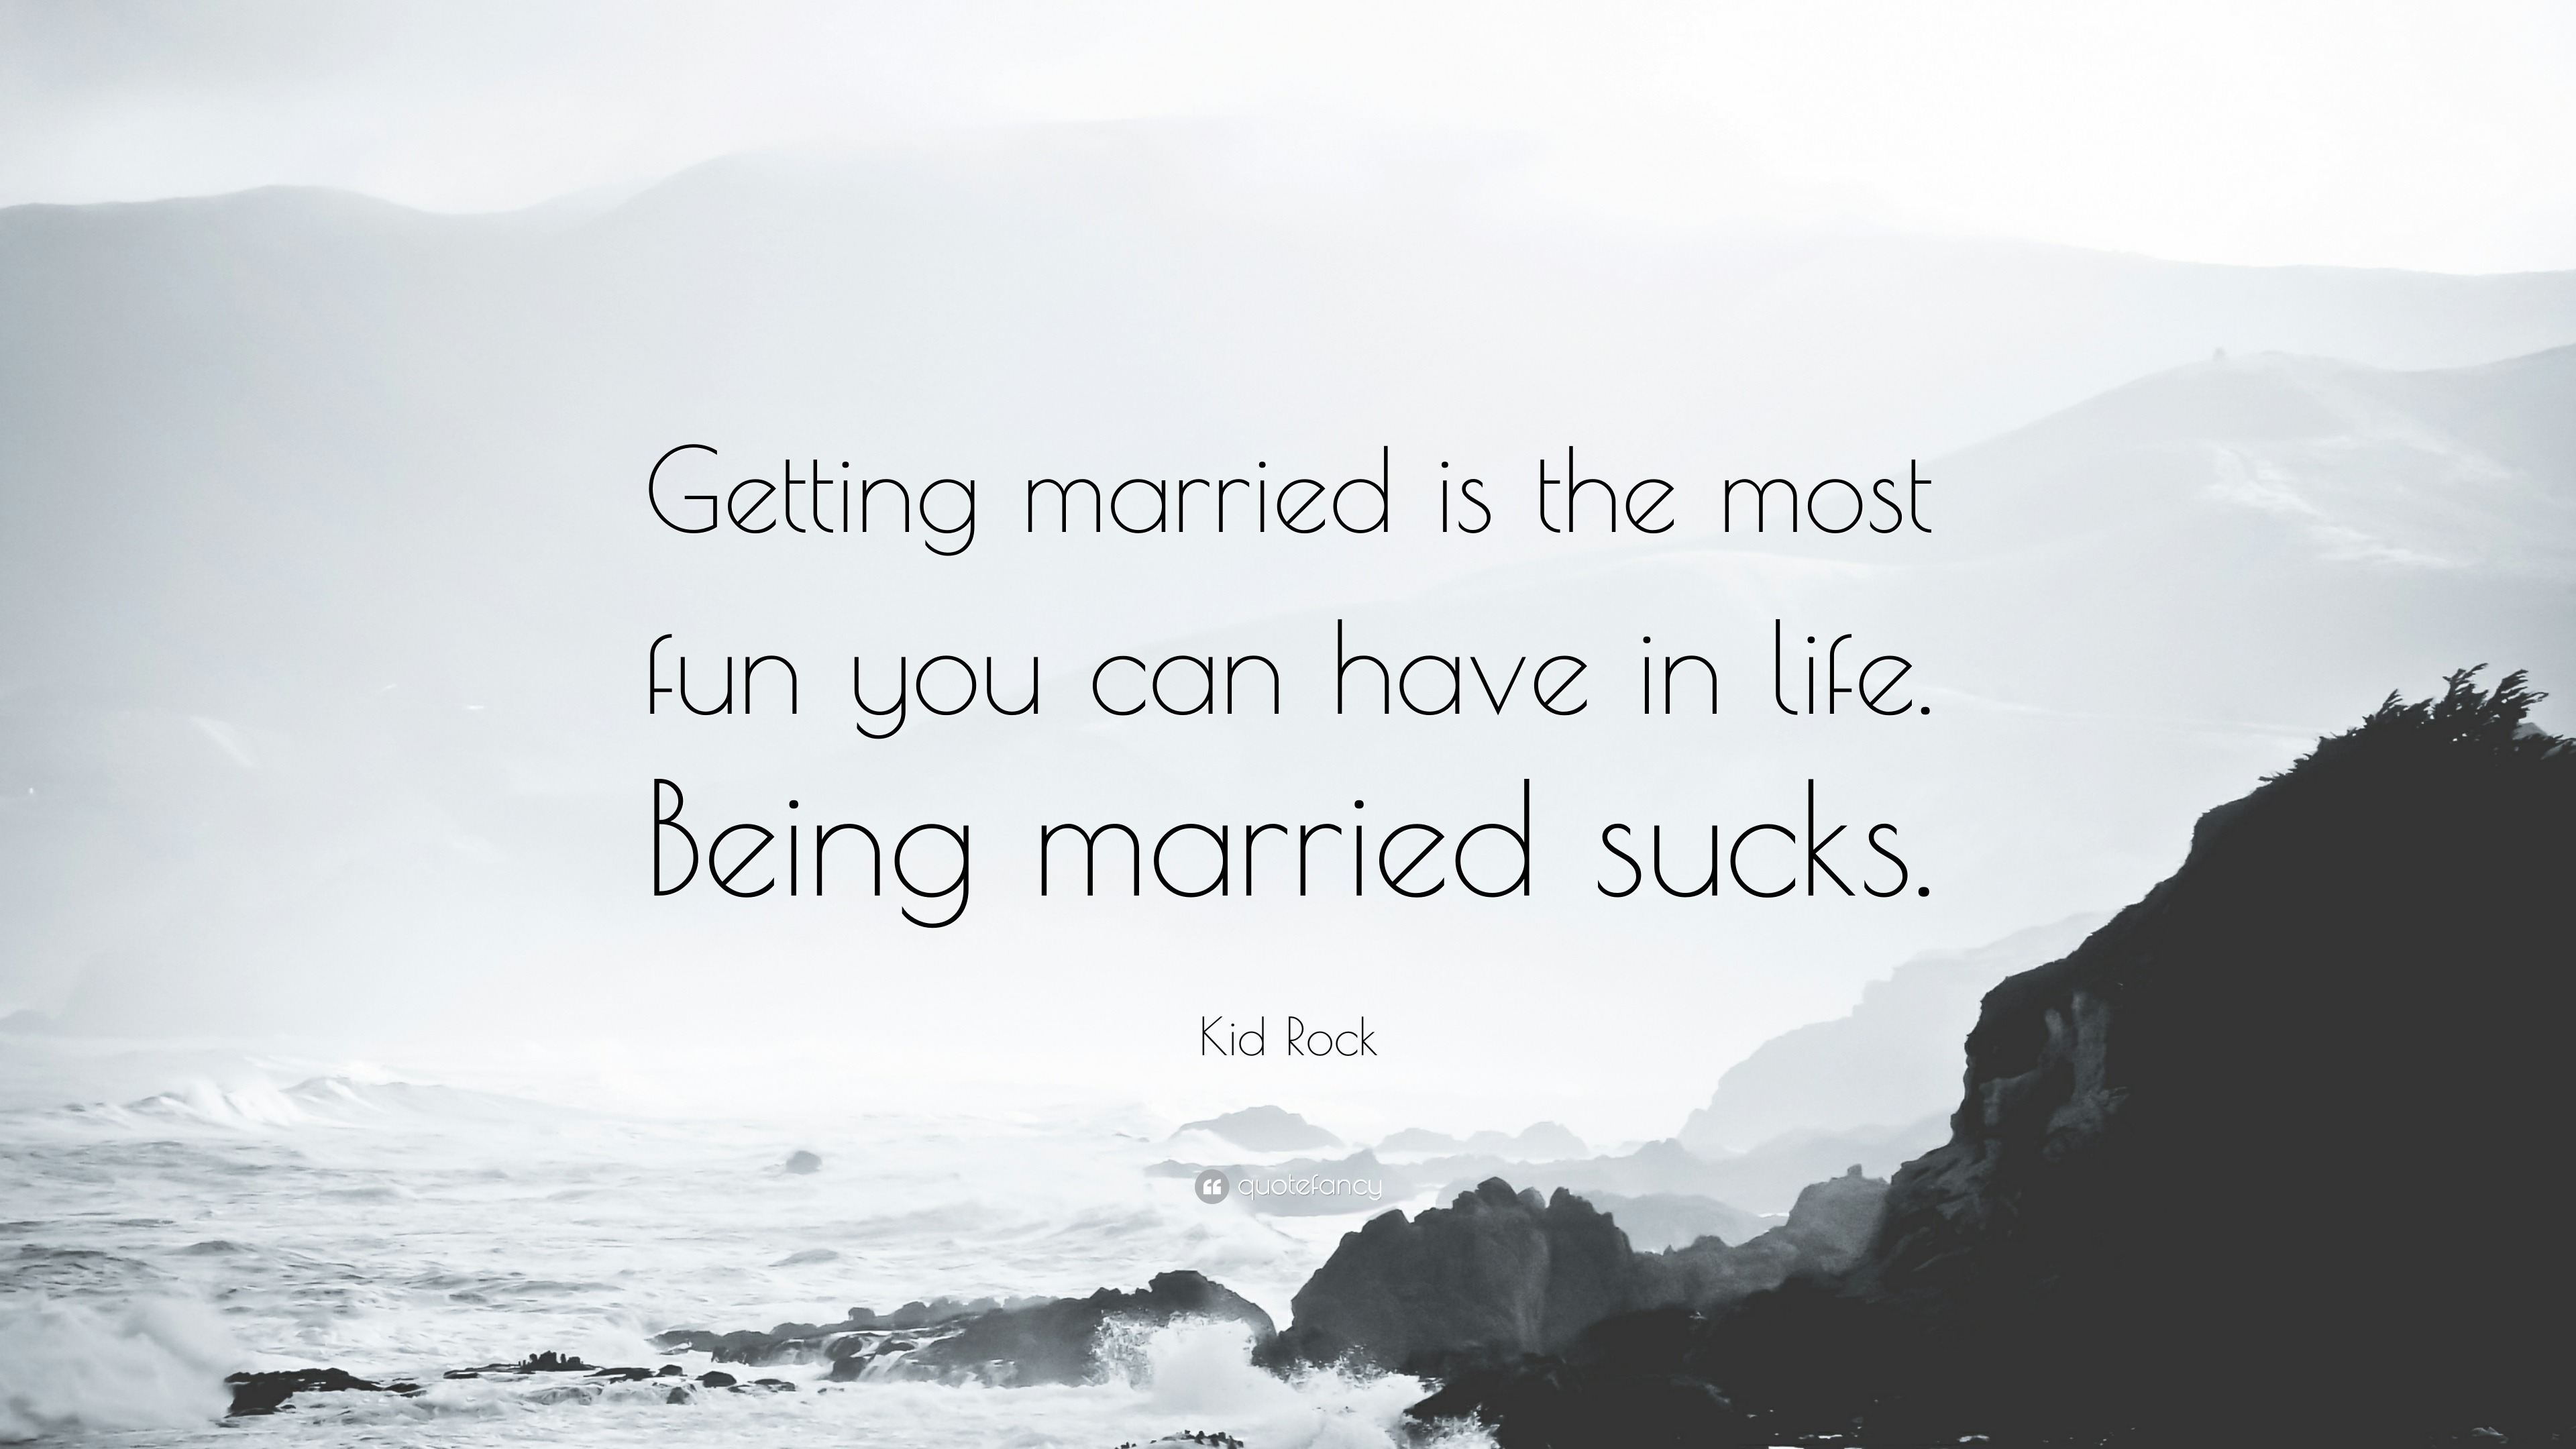 Kid Rock Quote “Getting married is the